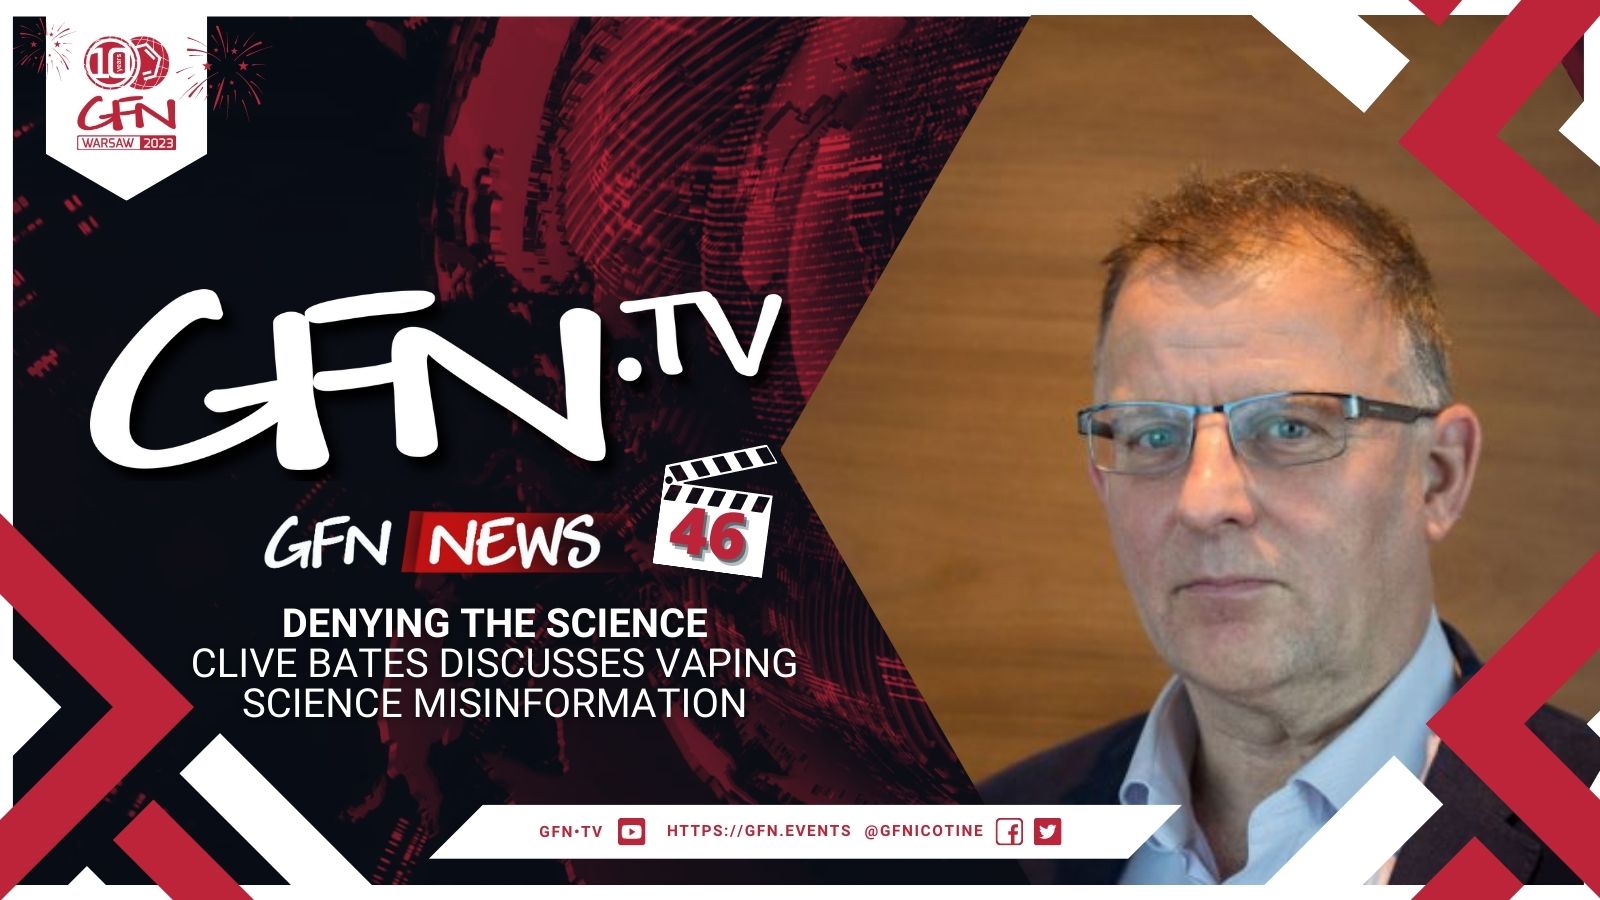 GFN News #46 | DENYING THE SCIENCE | Clive Bates discusses vaping science misinformation